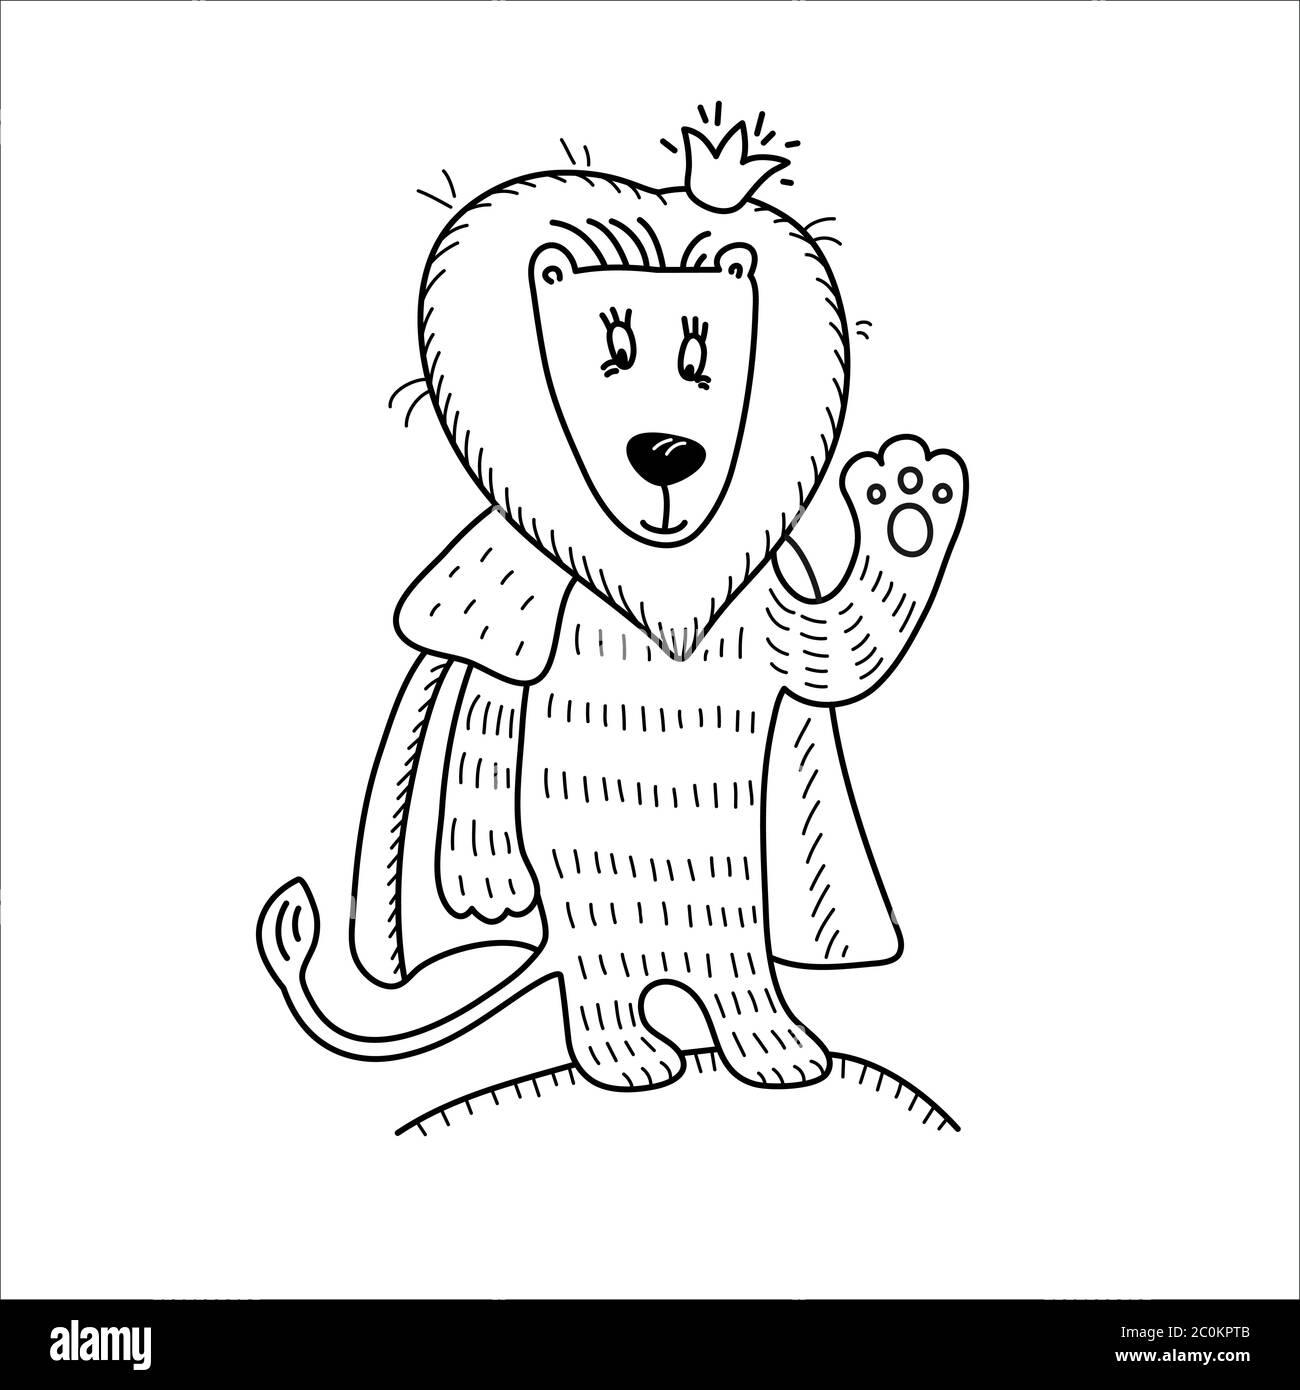 The little lion king in the crown and fur cape. Cute animal waving paw. Hand-drawn russian lubok. Fairytale doodle. Colouring book for kids Stock Vector